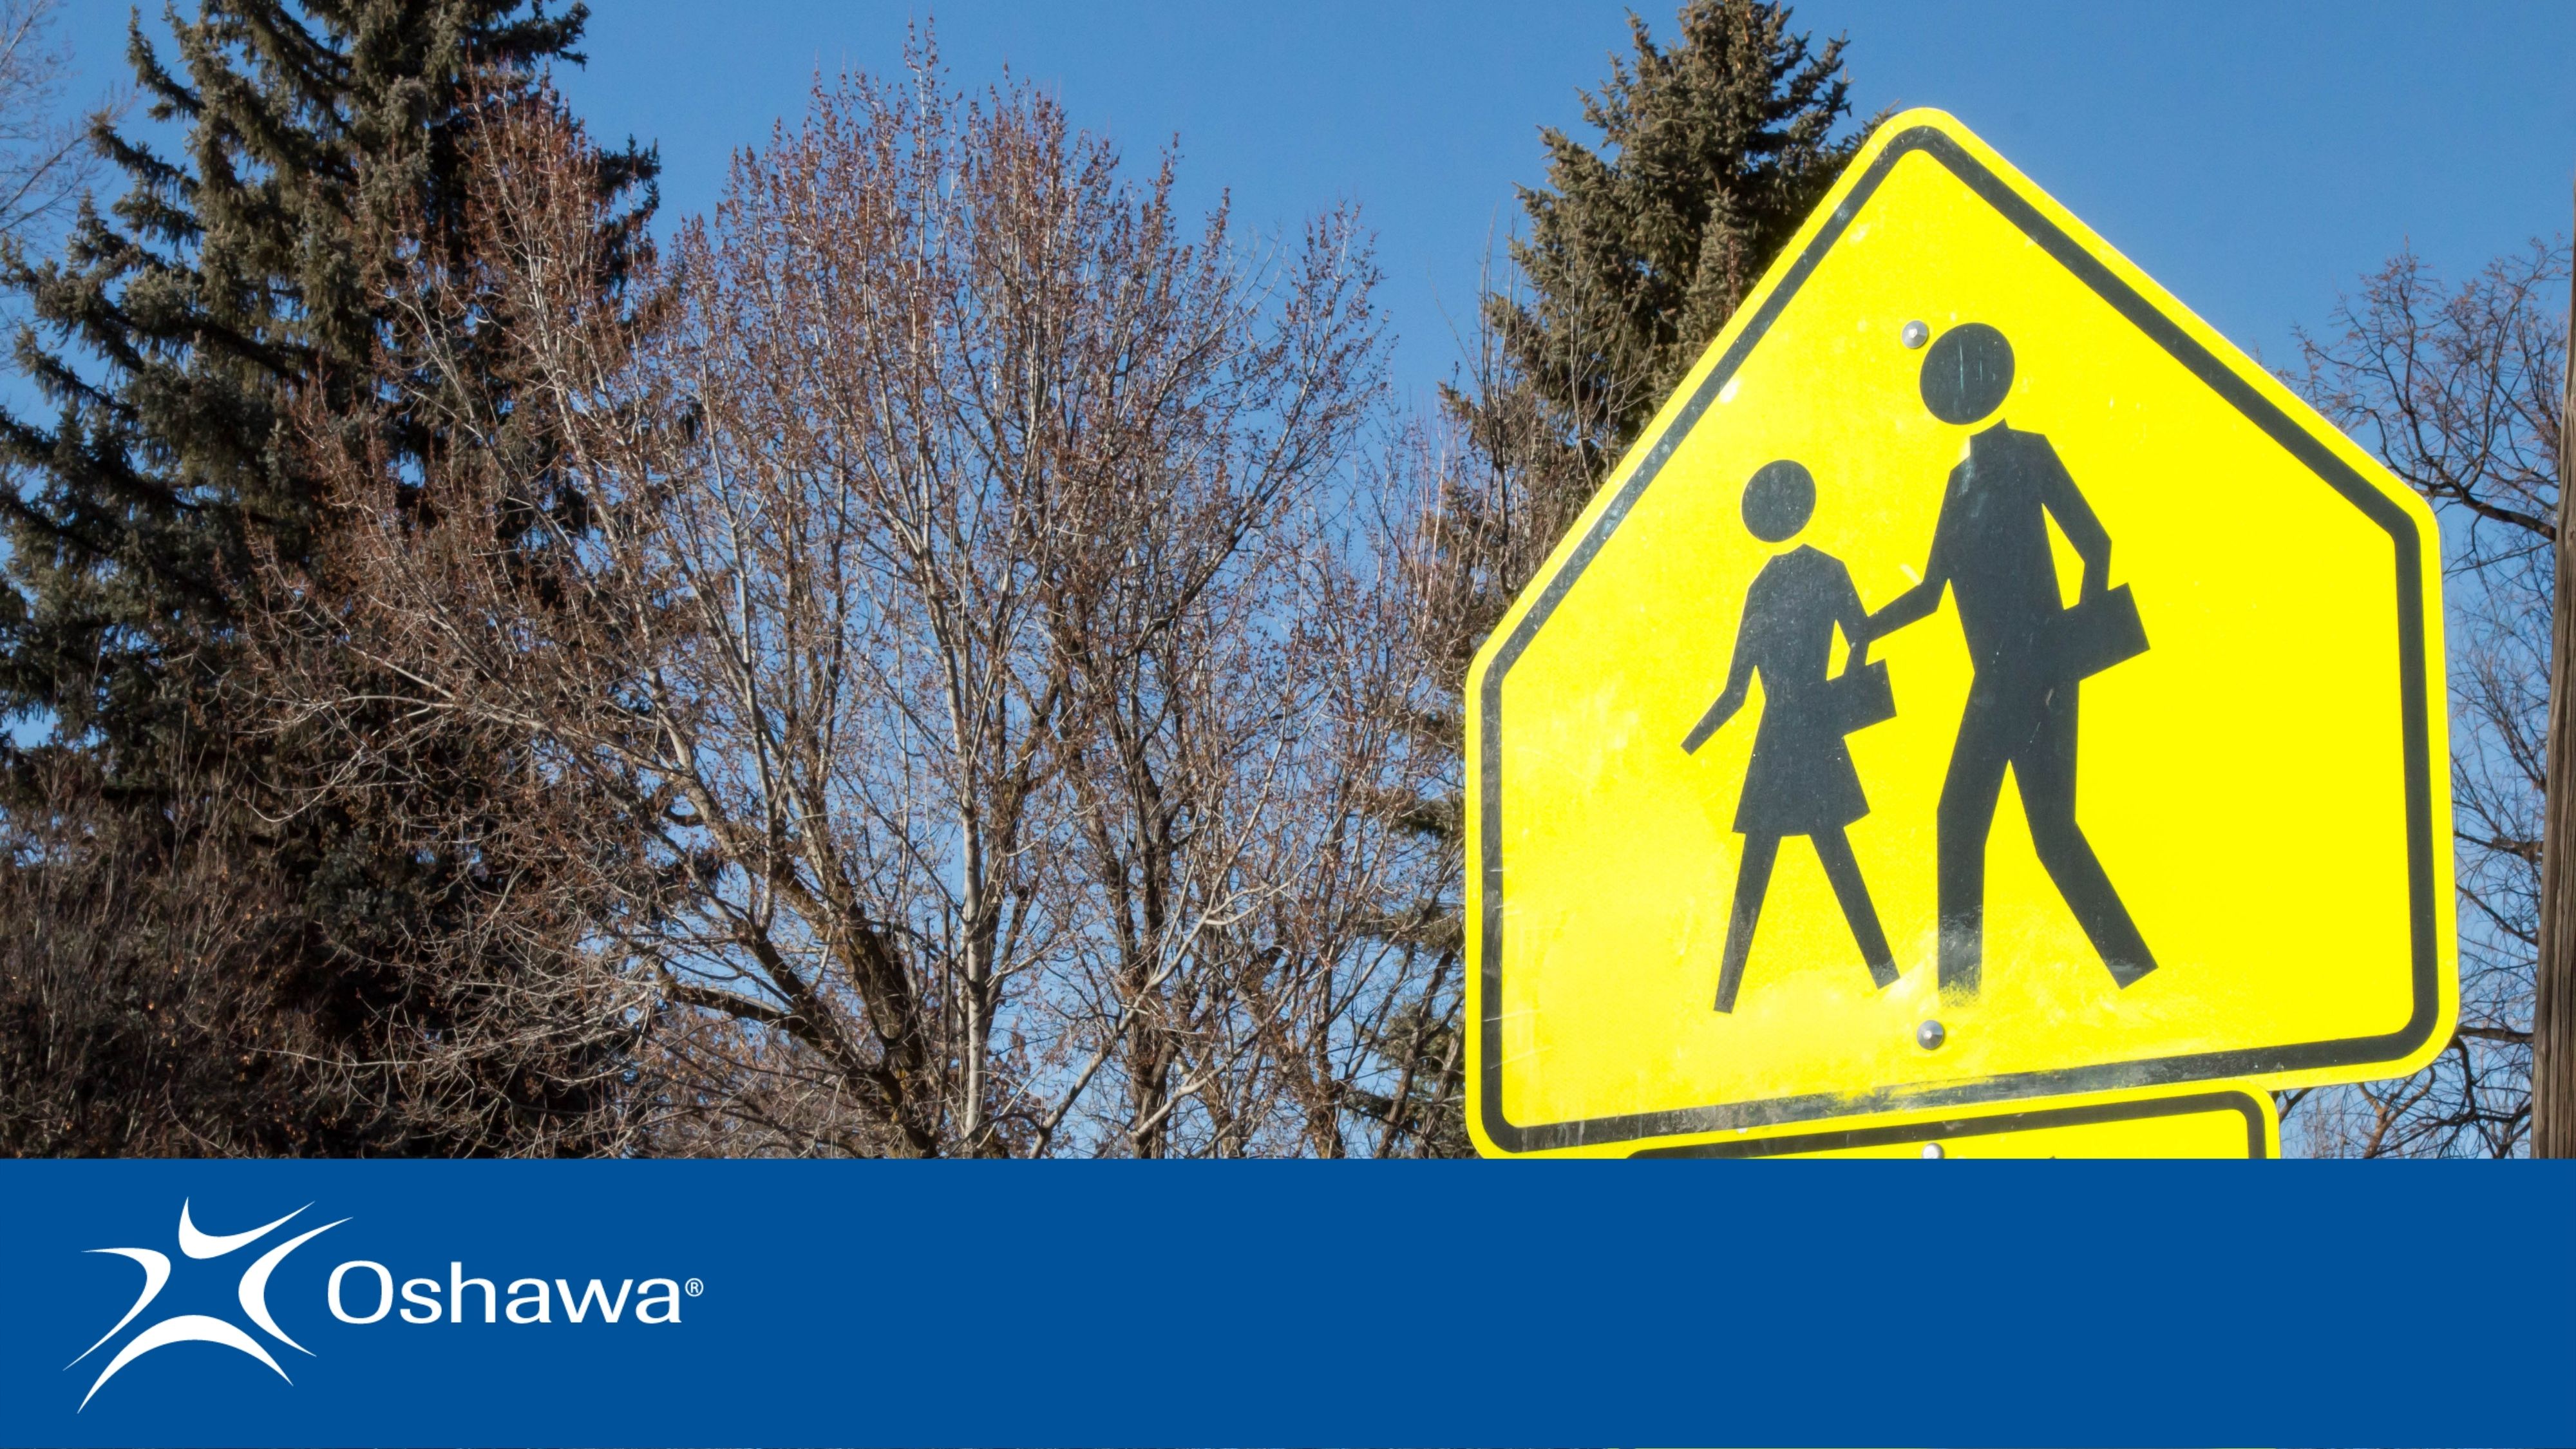 Yellow school crosswalk sign with trees in the background. Blue banner across the bottom with Oshawa logo in the left hand corner.